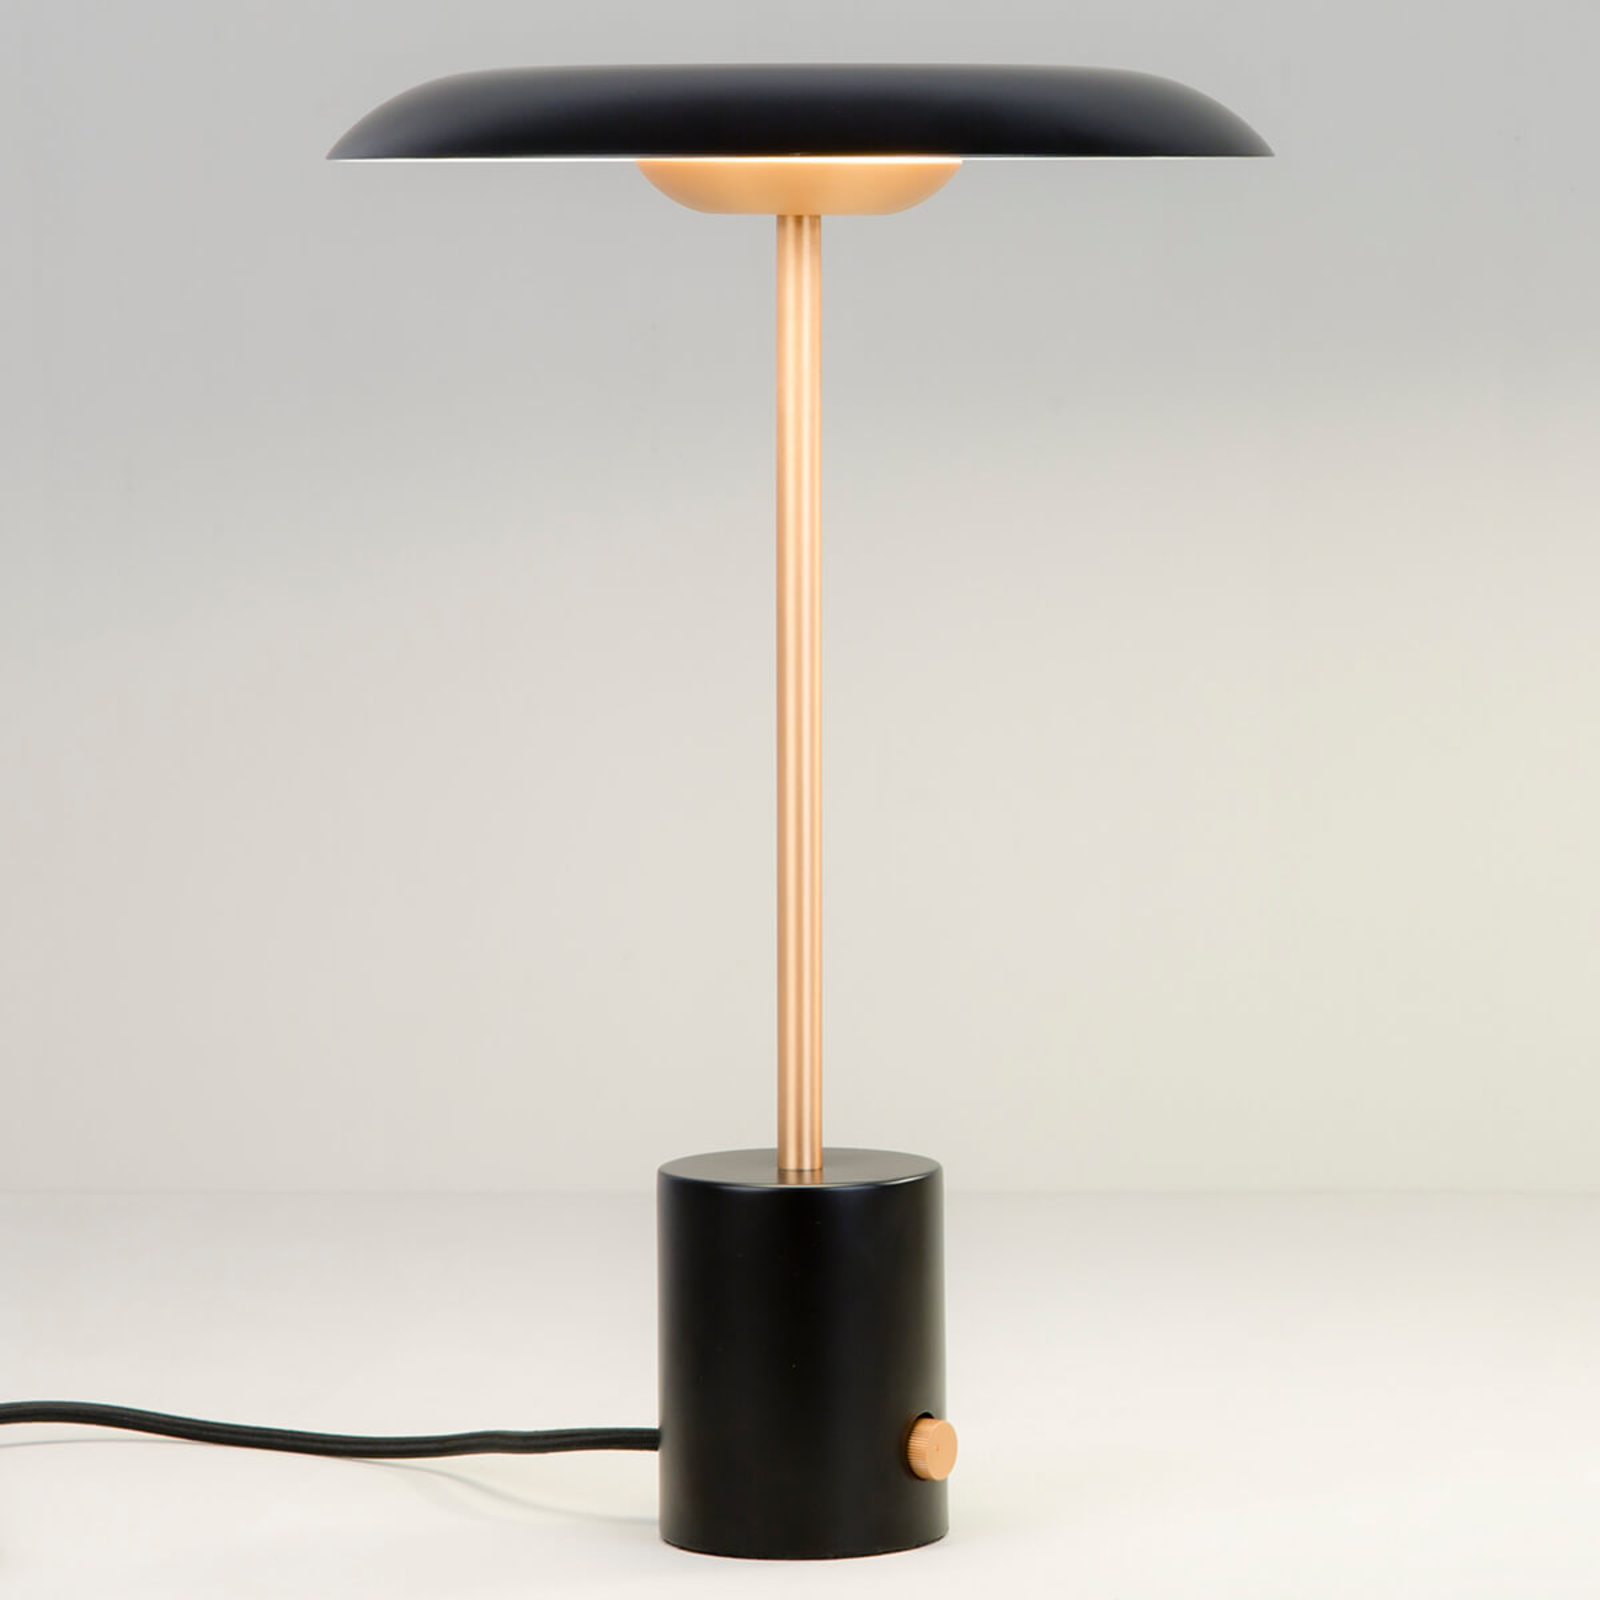 Hoshi LED table lamp with dimmer, black and copper